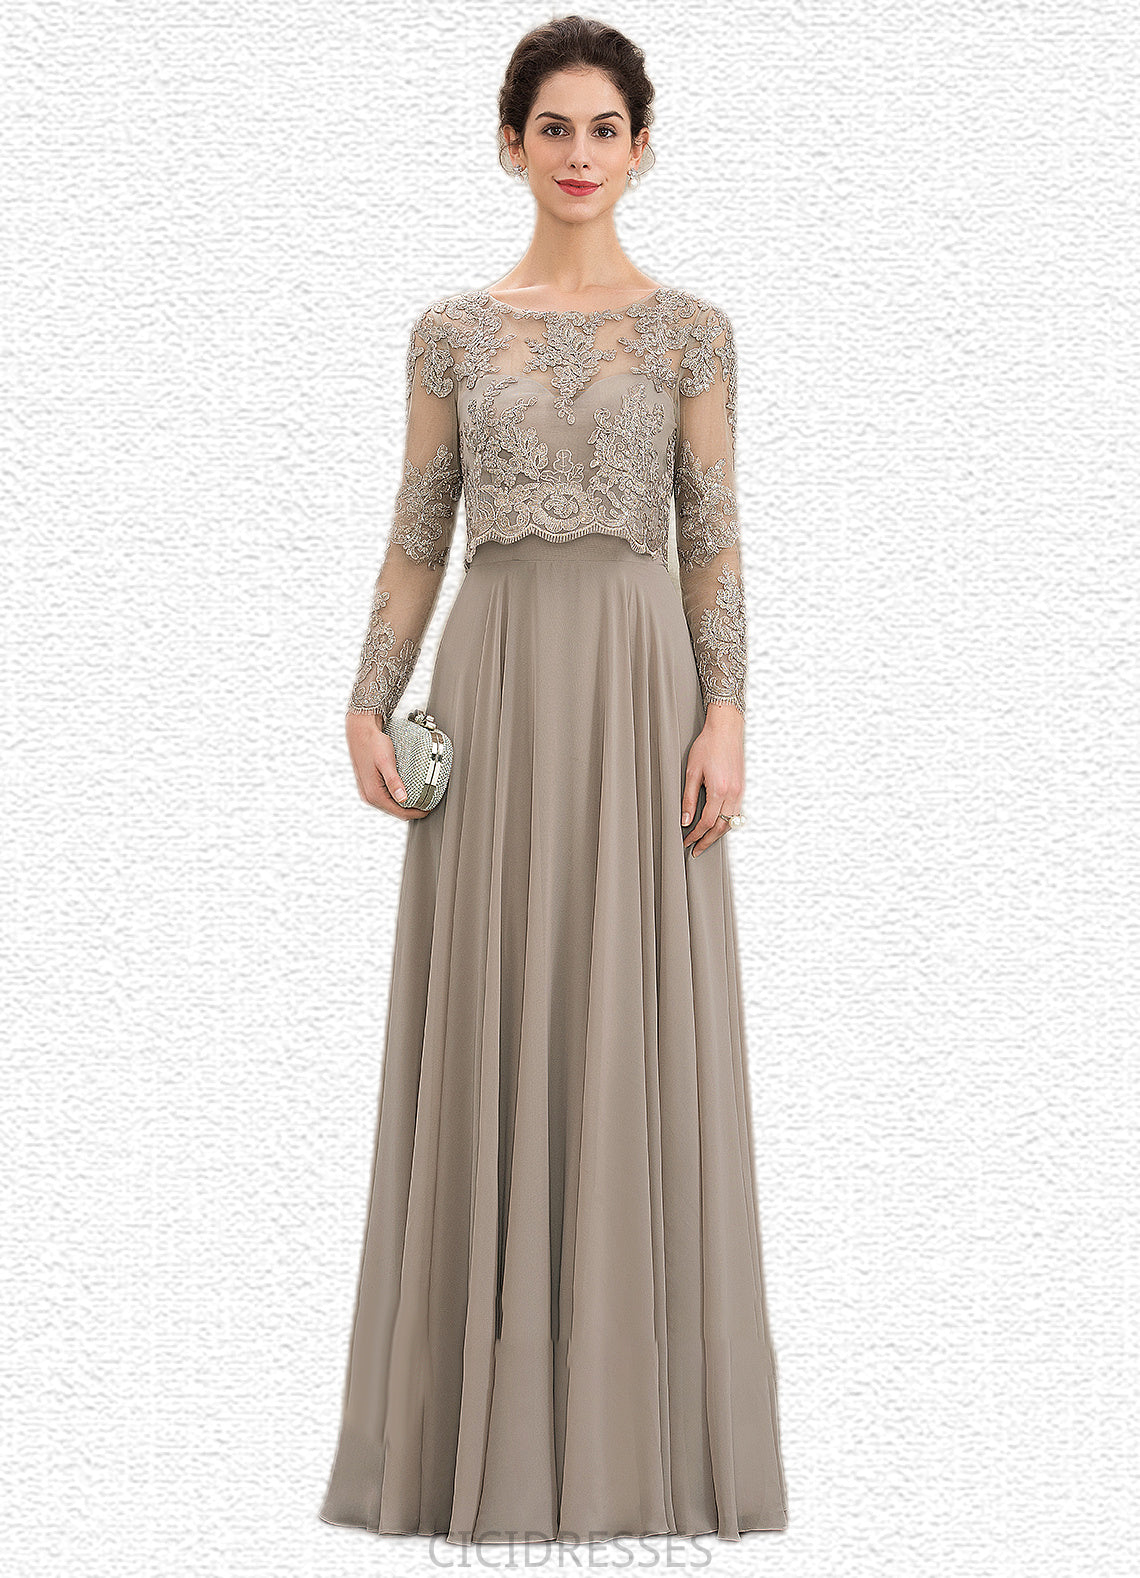 Summer A-Line Scoop Neck Floor-Length Chiffon Lace Mother of the Bride Dress With Sequins CIC8126P0014612